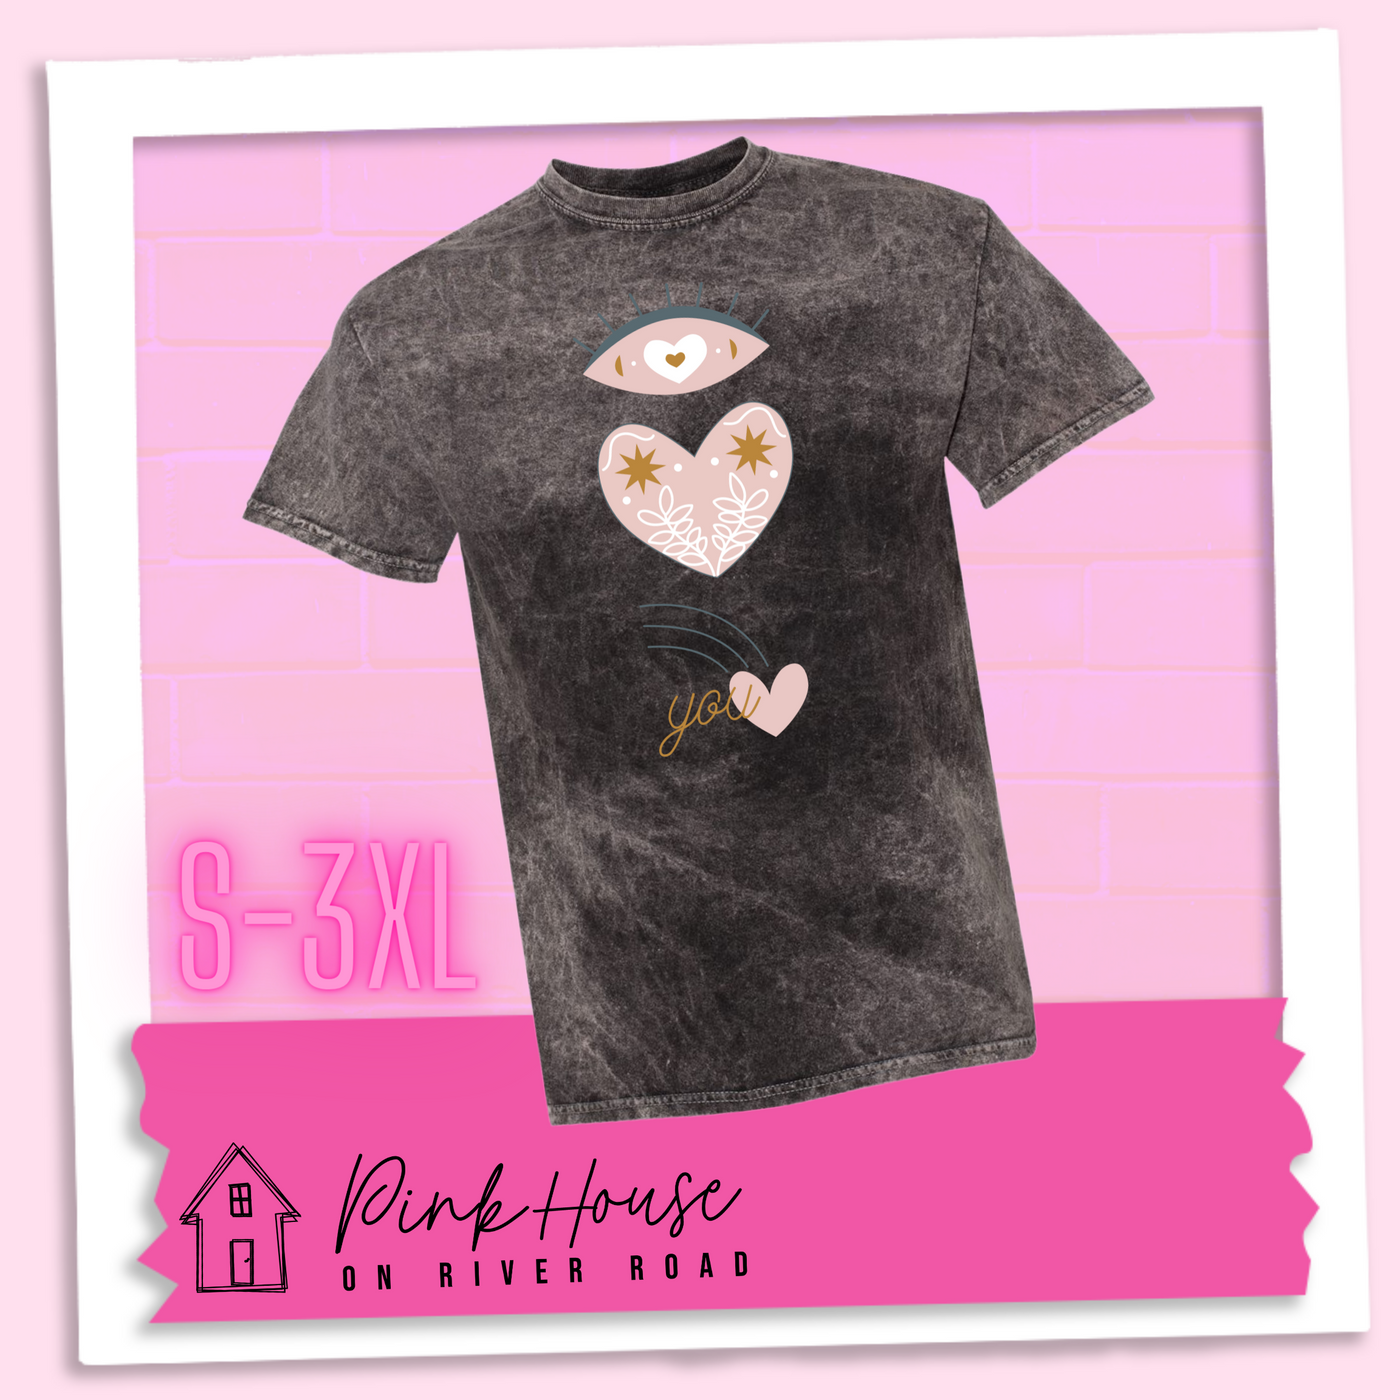 Black Mineral wash tee with a graphic of an eye with a heart for the pupil and underneath that a heart with a floral and star design and a shooting heart with the word you. The graphic represents eye heart you